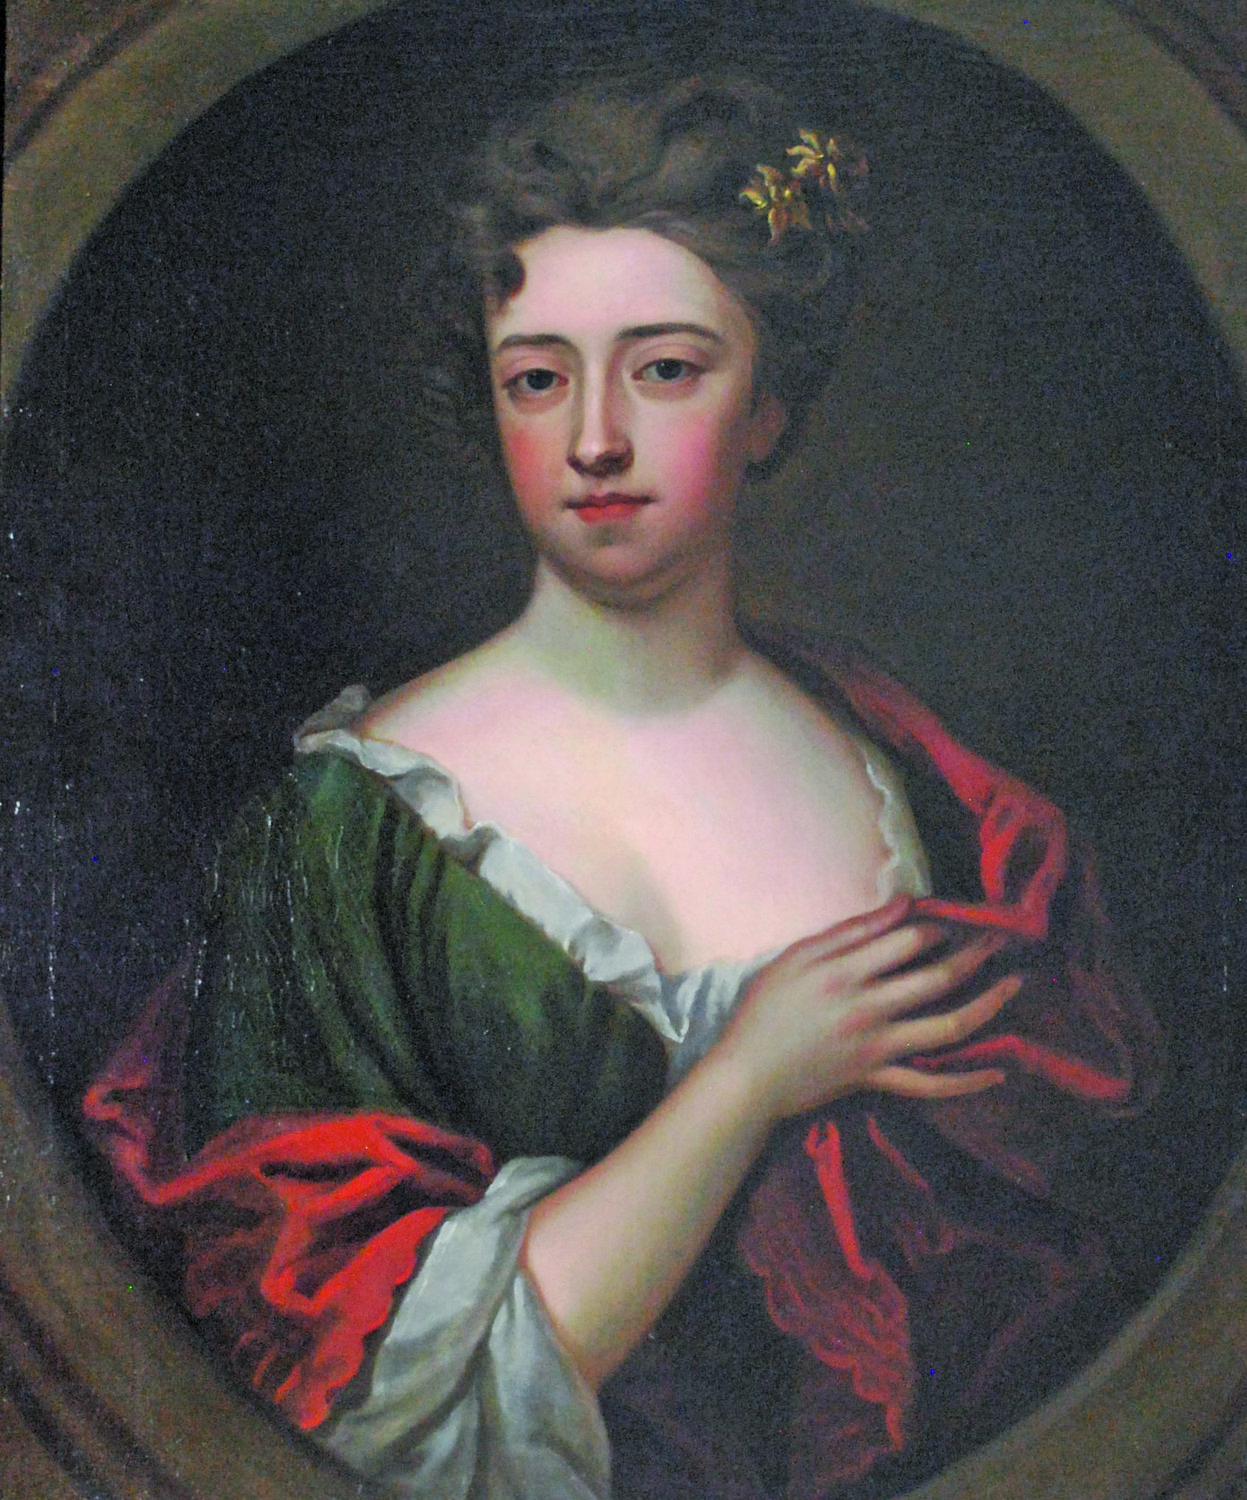 Elizabeth Graeme Fergusson (1739-1801) is believed to have been the best educated woman in Colonial America.